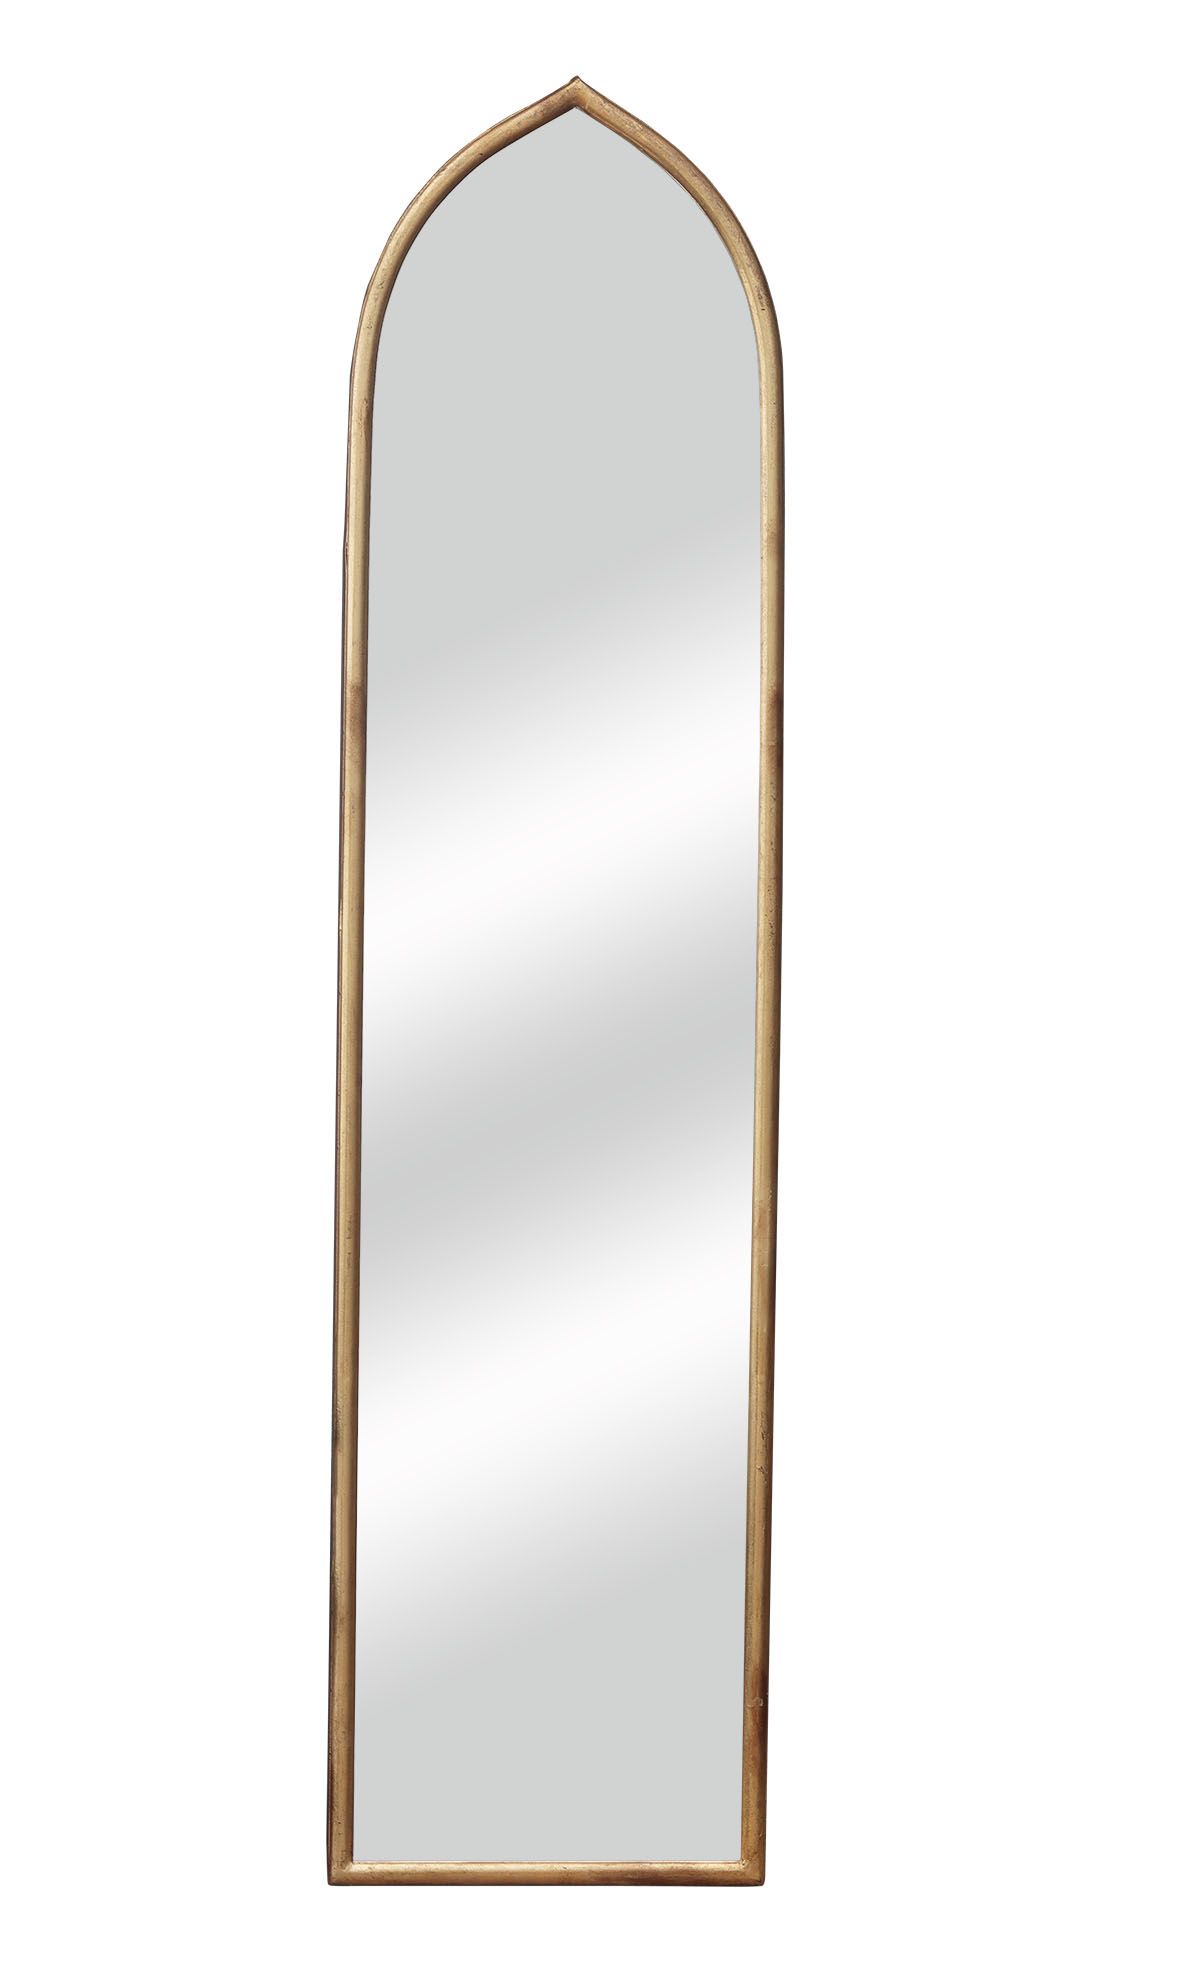 Vintage Full Length Wall Mirror With Arched Metal Frame, Simple Full Throughout Antique Aluminum Wall Mirrors (View 15 of 15)